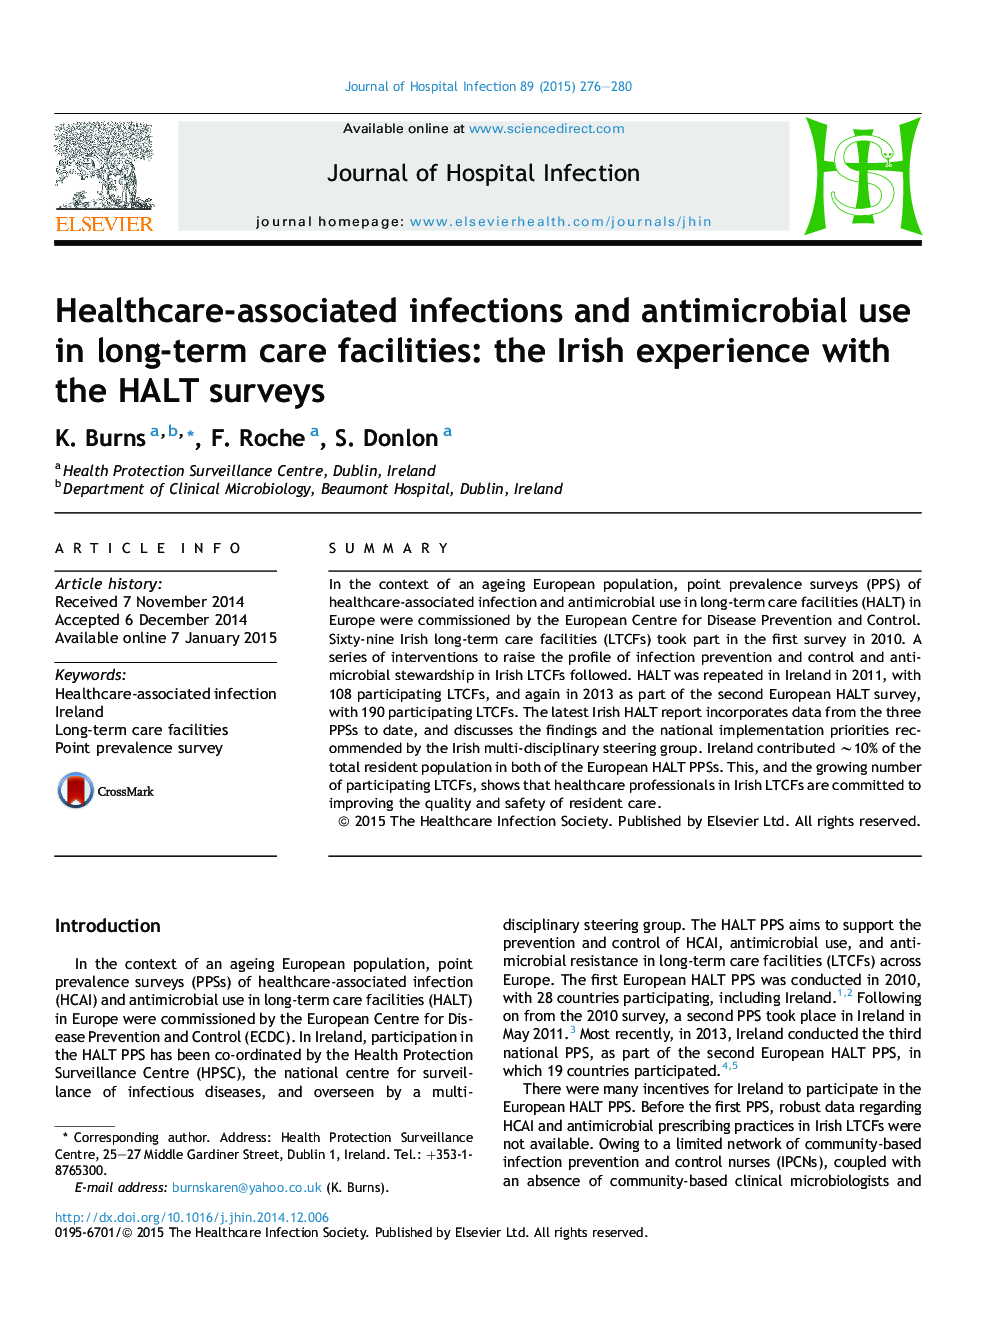 Healthcare-associated infections and antimicrobial use in long-term care facilities: the Irish experience with the HALT surveys